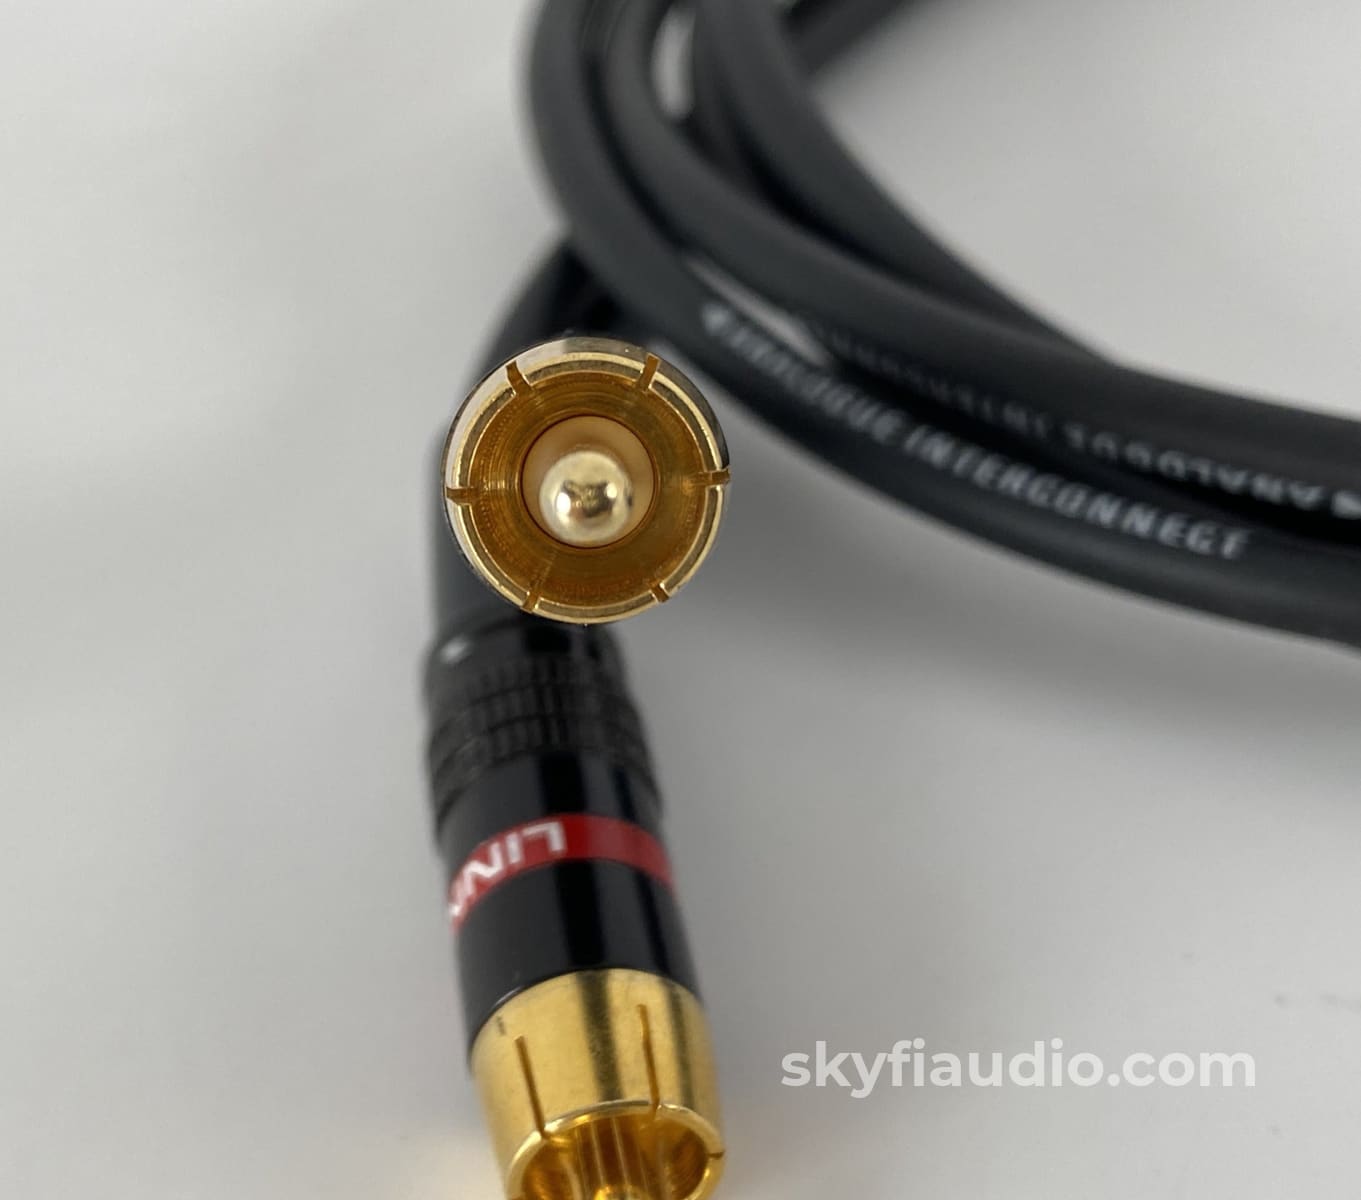 Linn Audio Analog Interconnect Rca 1.0M Cables